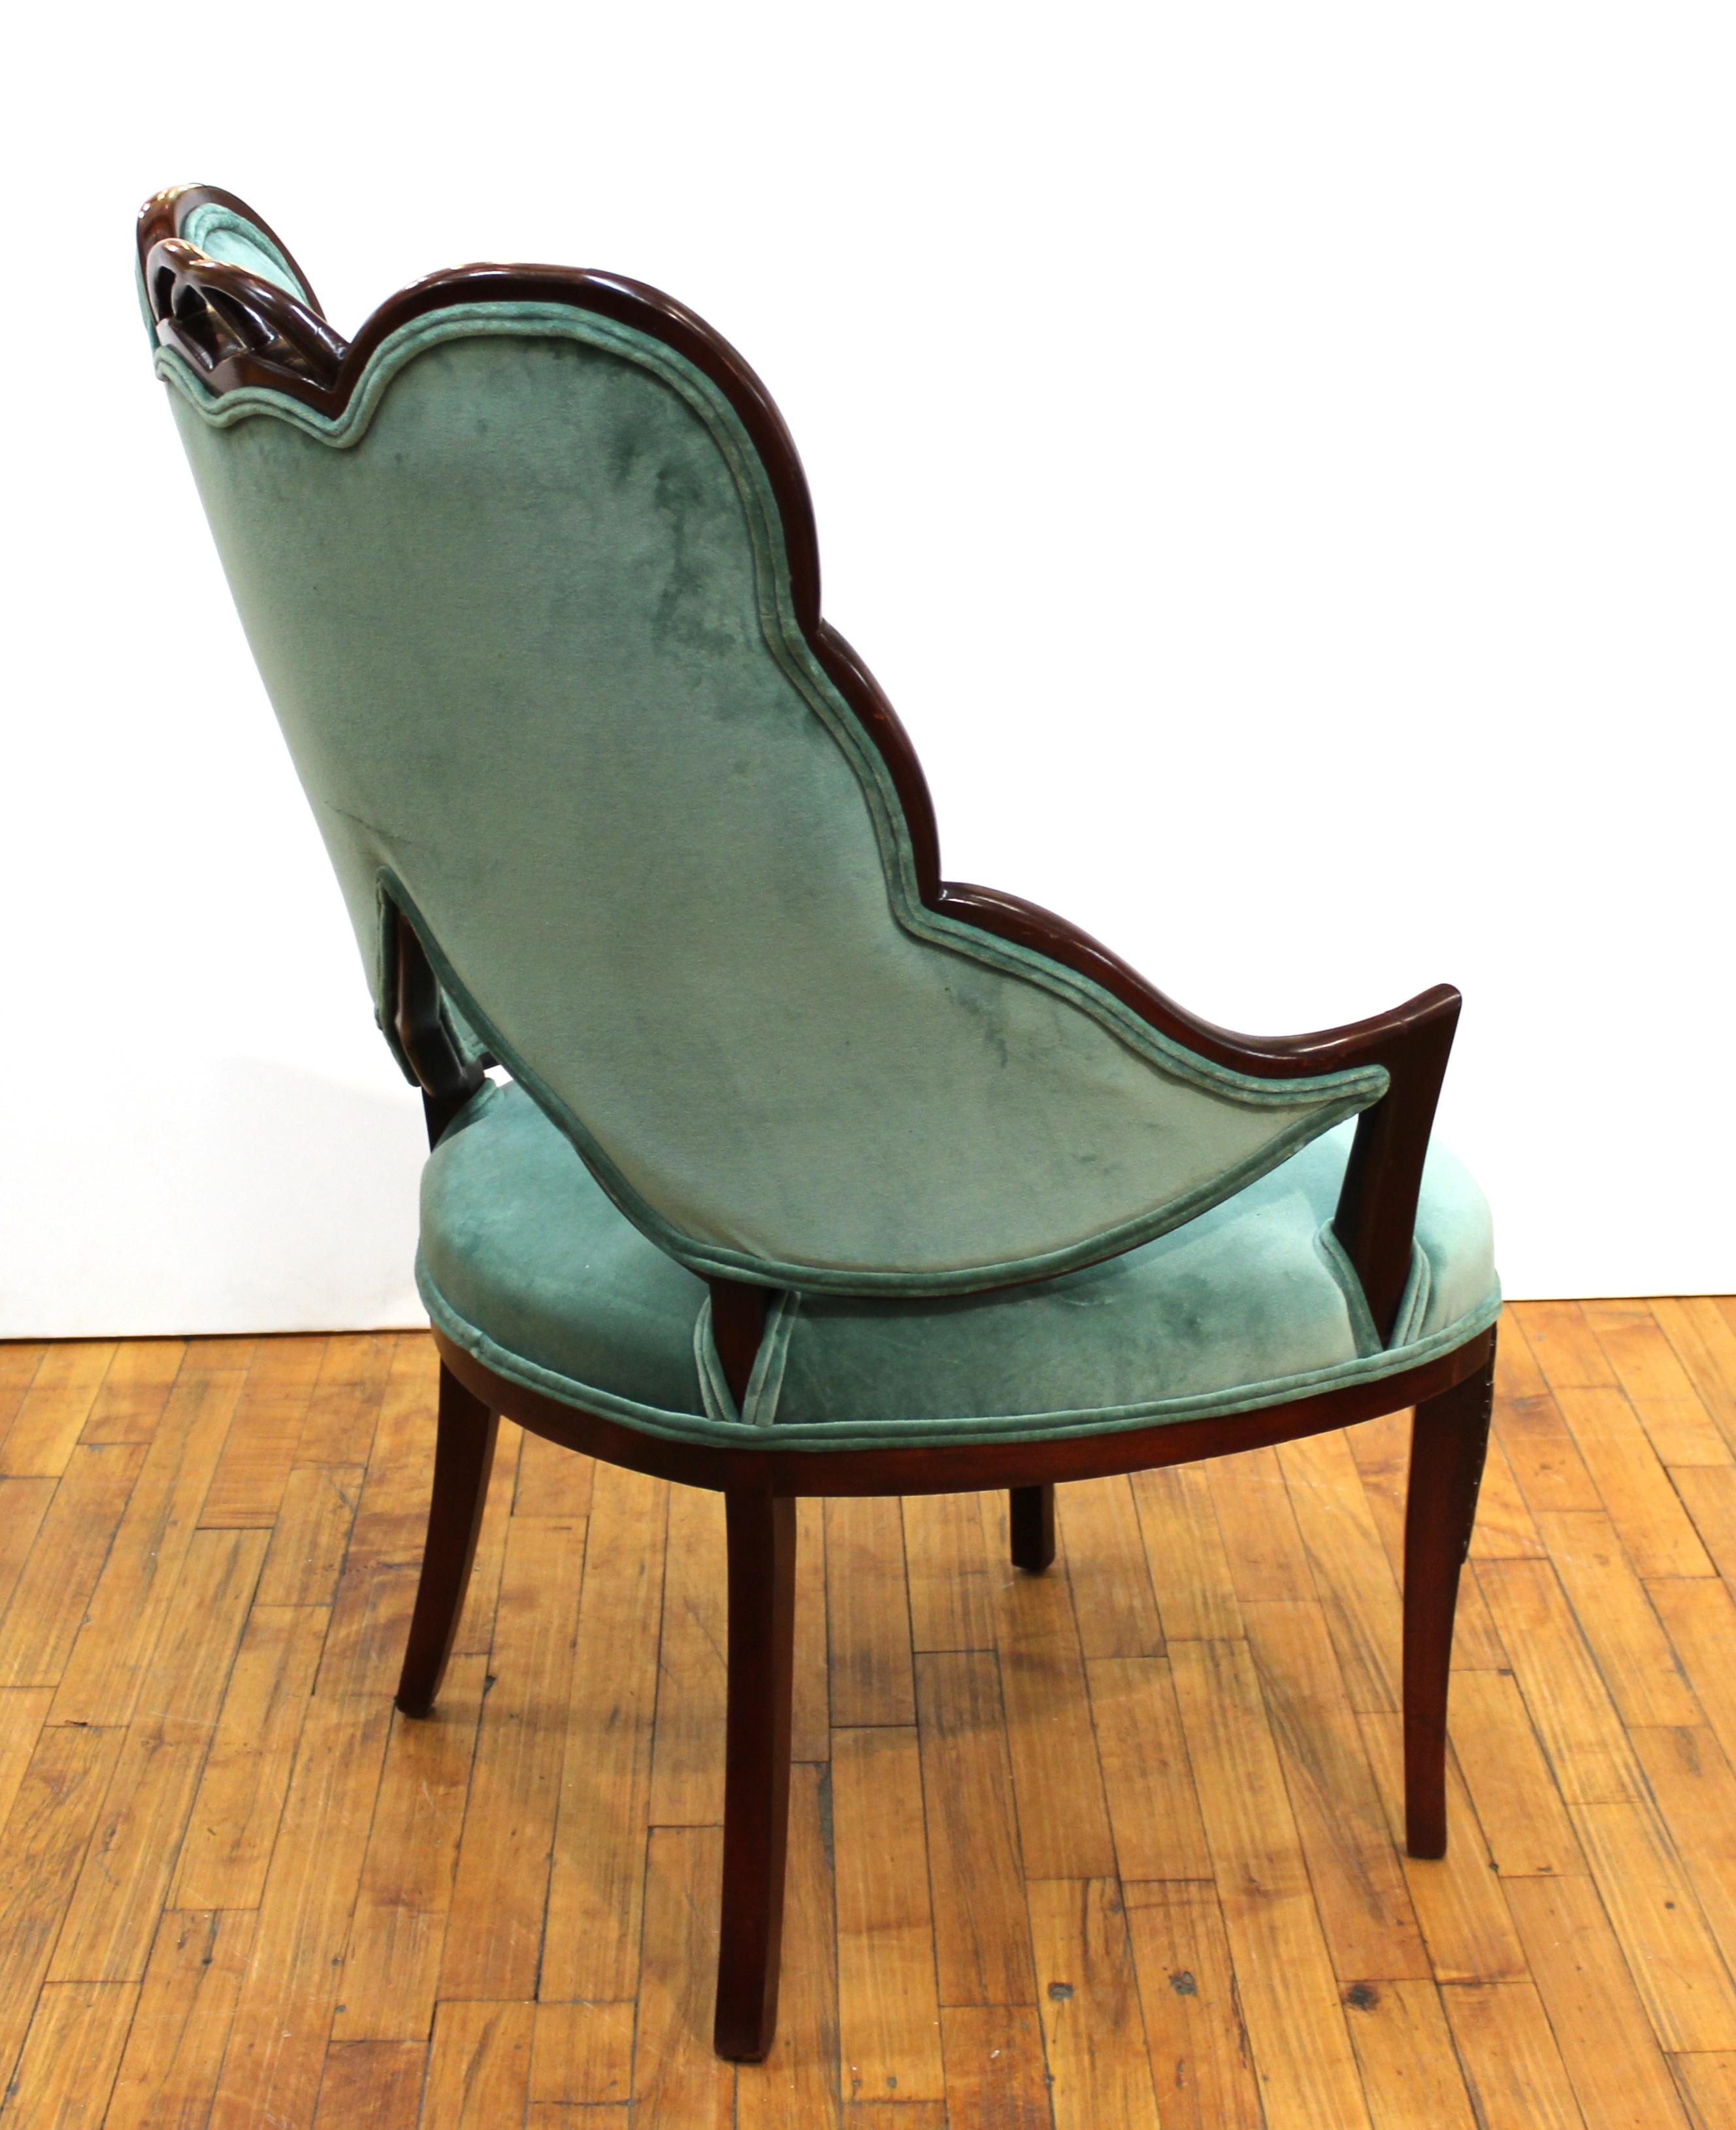 French Art Deco Mahogany Chairs in Jade Green Velvet with Leaf Design 4